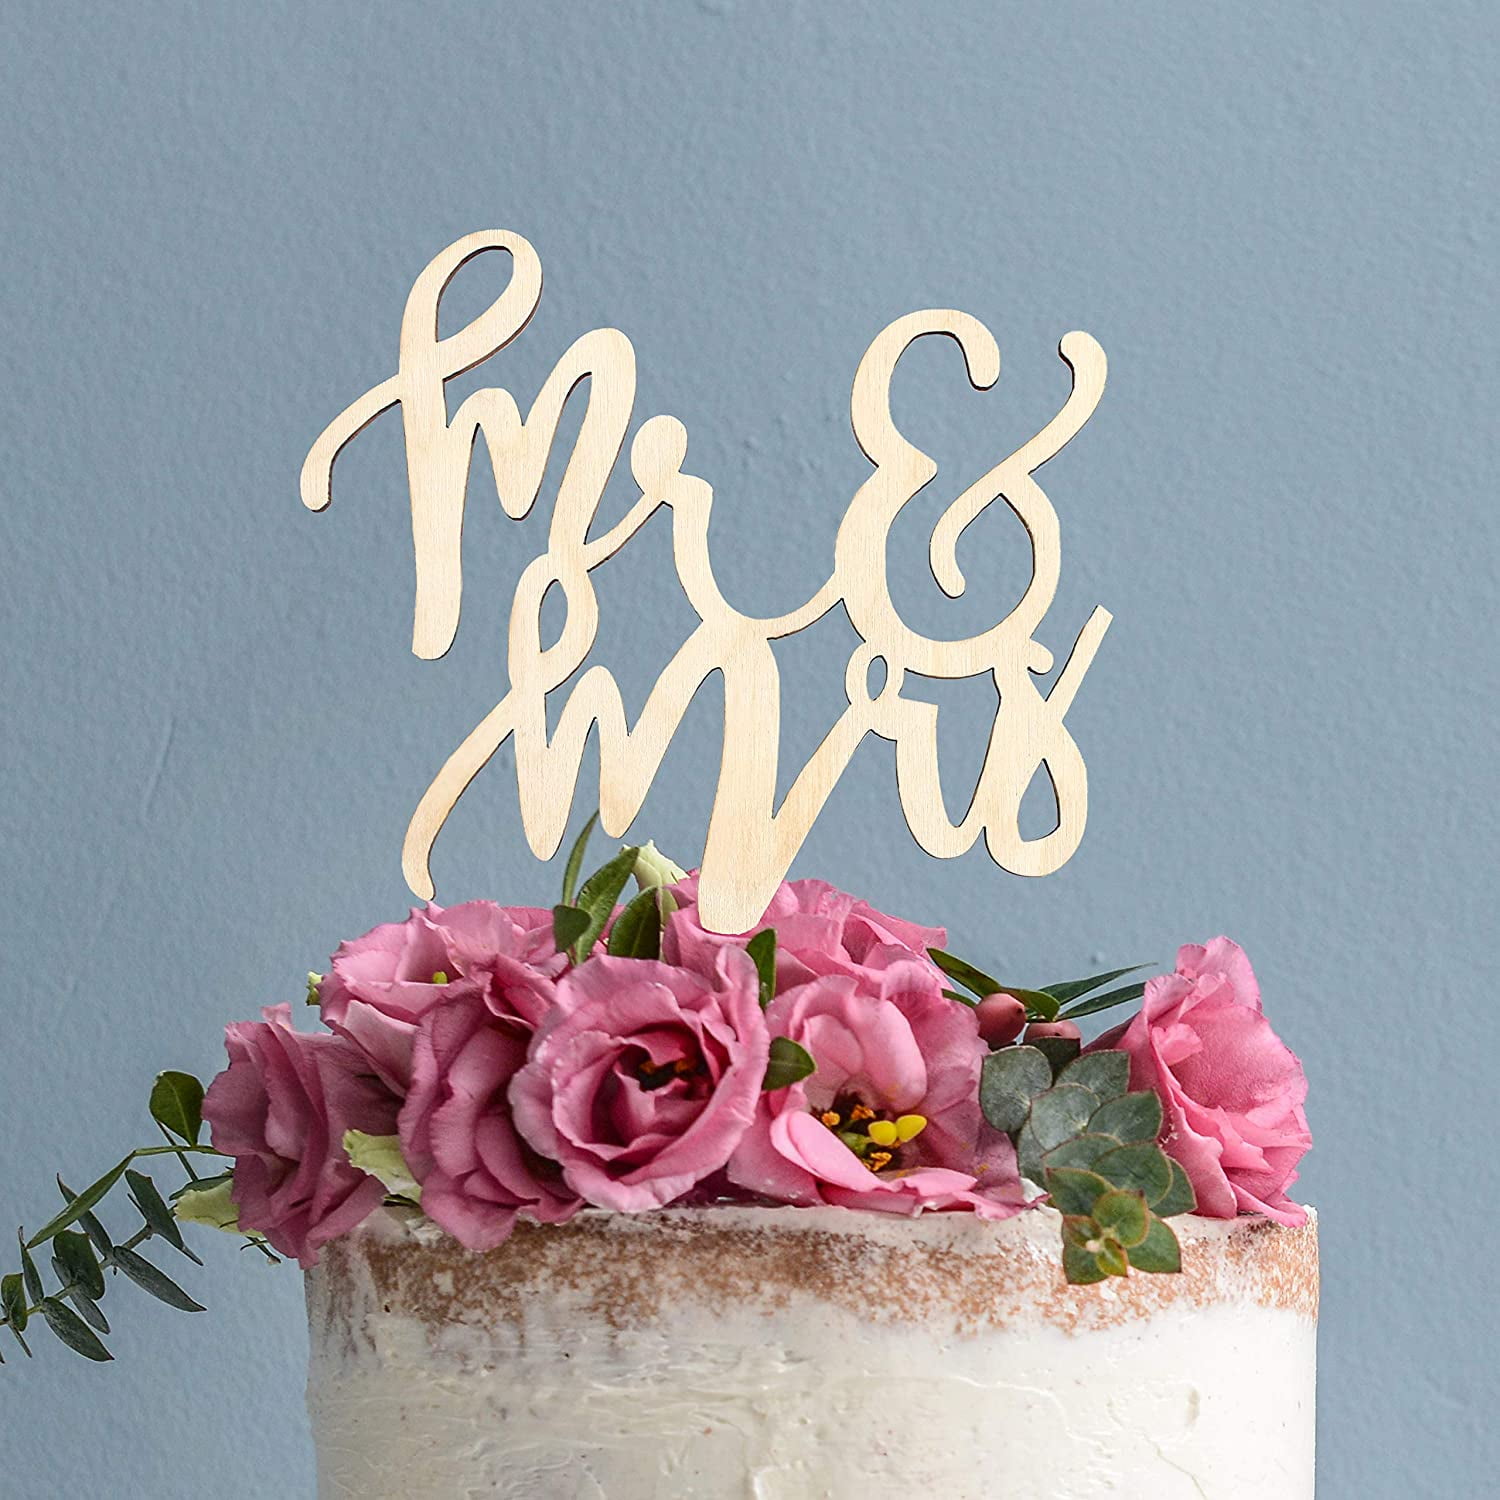 Cake Toppers Wooden Wedding Cake Topper Party Cake Decor and Mrs Romantic Mr 